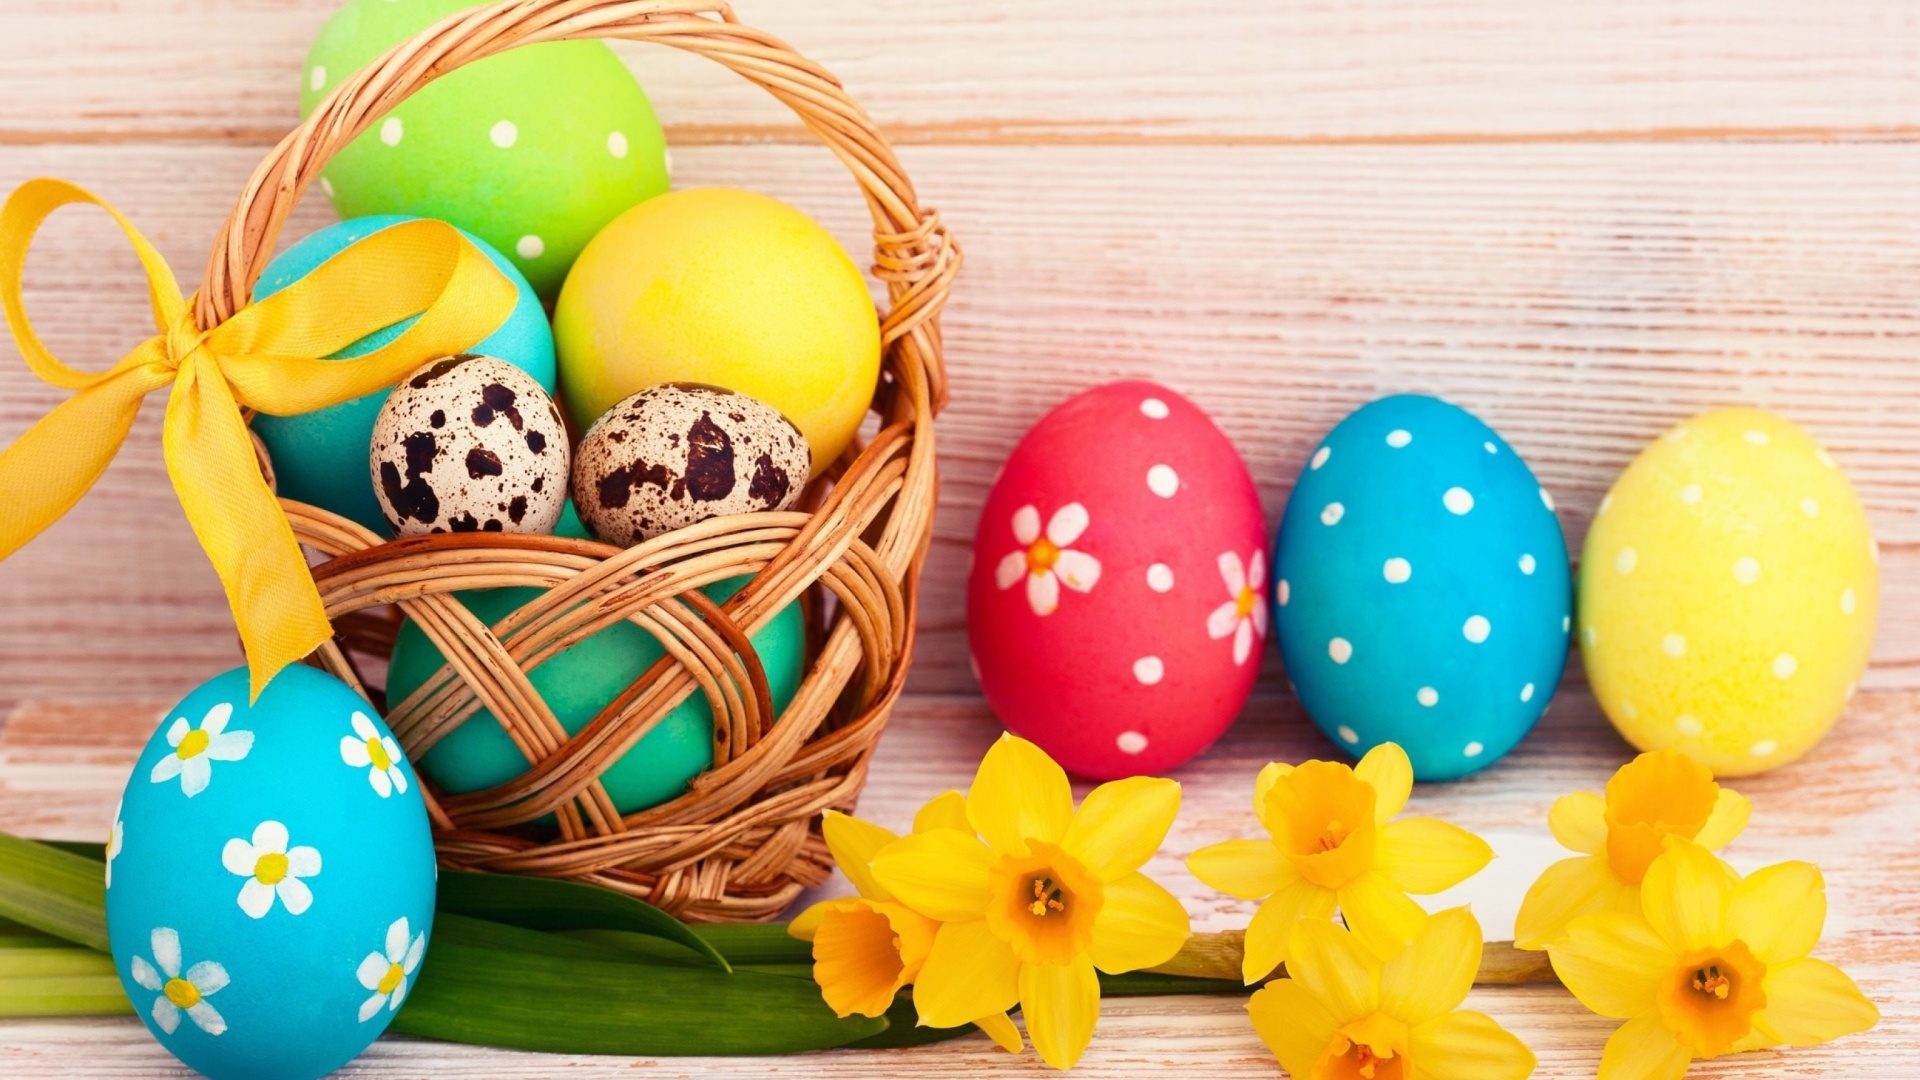 Das Easter Spring Daffodils Flowers and Eggs Decorations Wallpaper 1920x1080